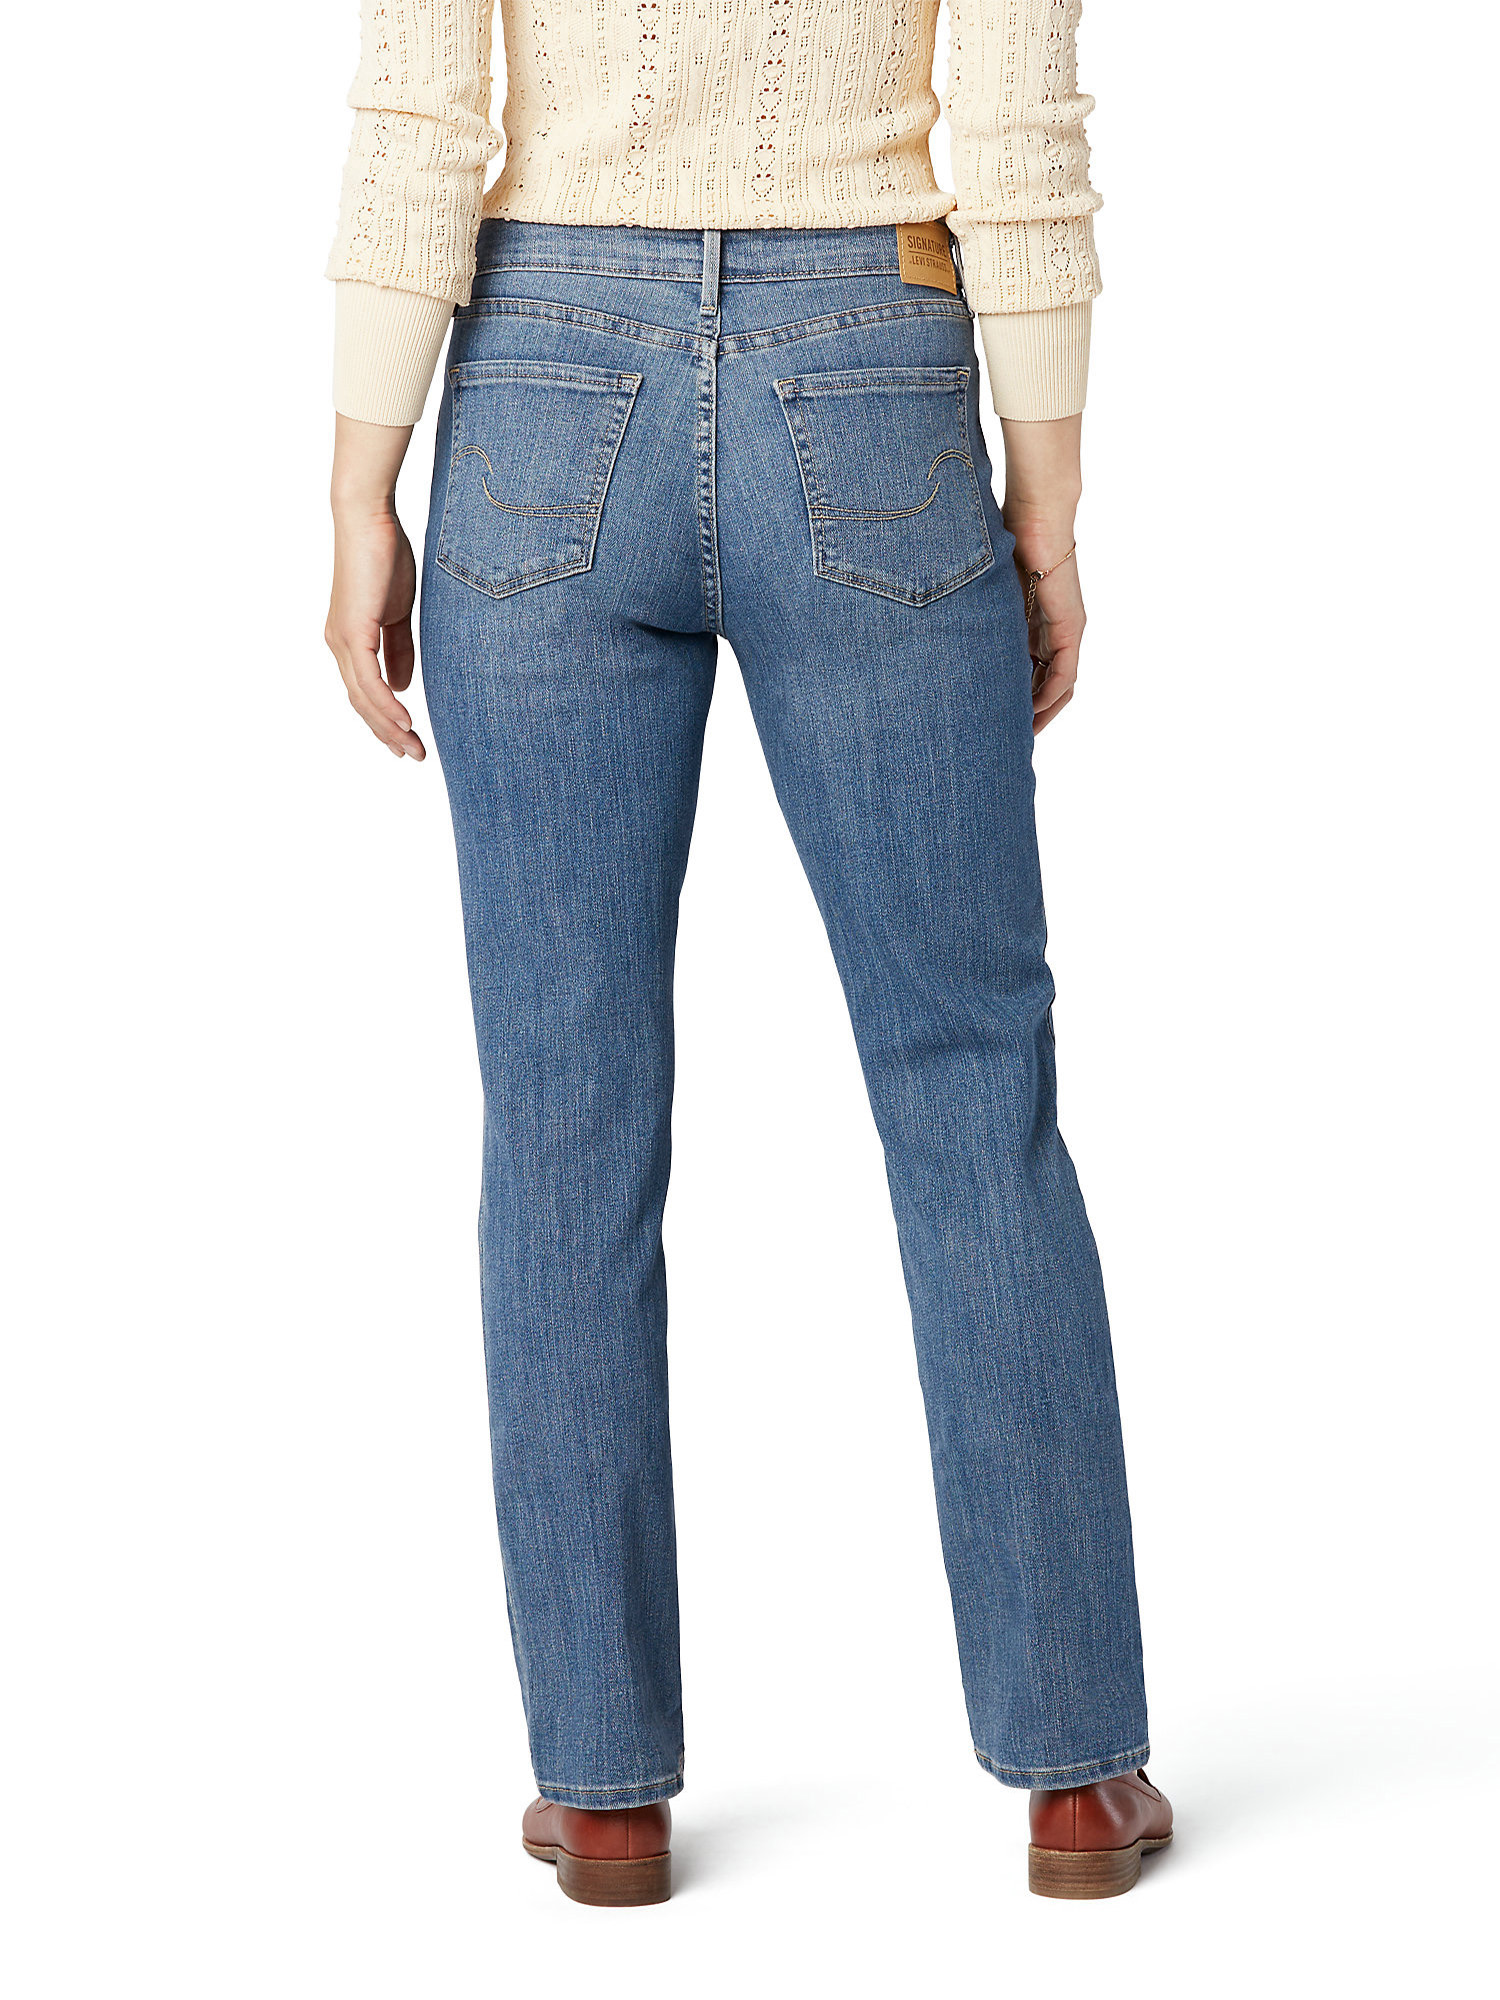 Signature by Levi Strauss & Co. Women's and Women's Plus Size Mid Rise Modern Straight Jeans, Sizes 2-28 - image 2 of 5